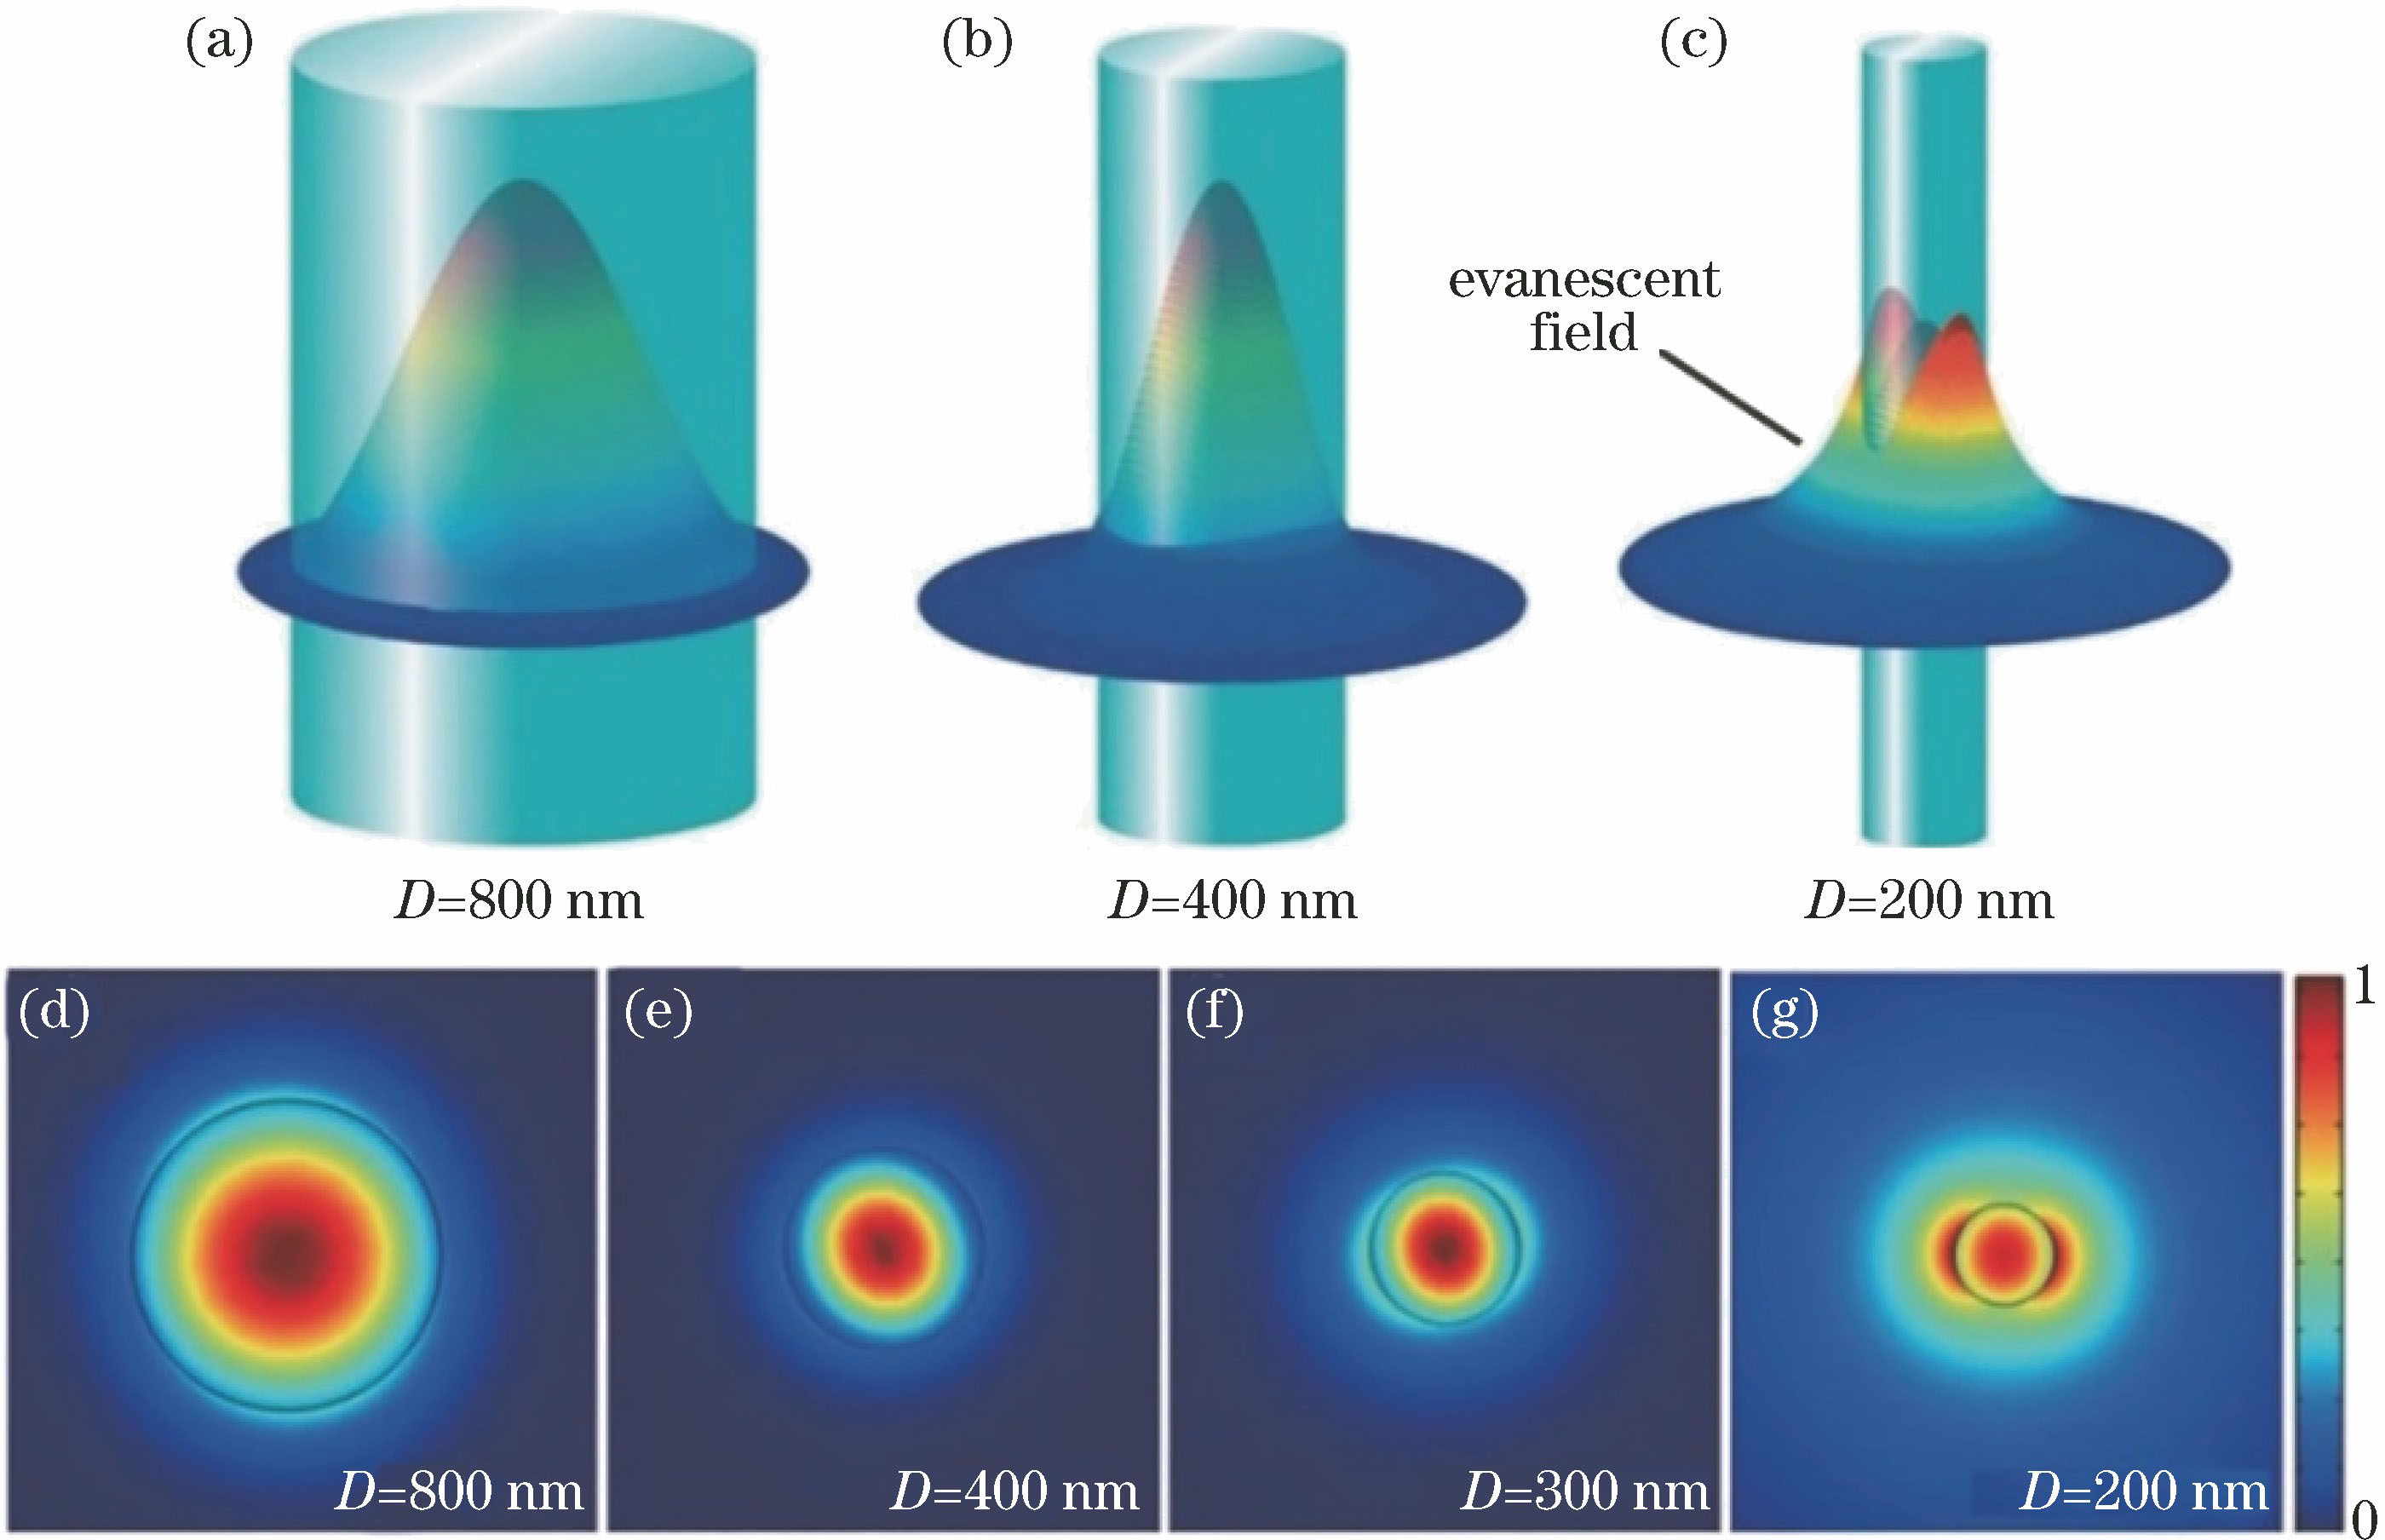 Spatial distributions of optical fields guided by MNF[4]. 3D view of z-direction Poynting vectors of MNF at 633 nm wavelength with diameters of (a) 800 nm, (b) 400 nm, (c) 200 nm; 2D view of MNF with diameters of (d) 800 nm, (e) 400 nm, (f) 300 nm, (g) 200 nm